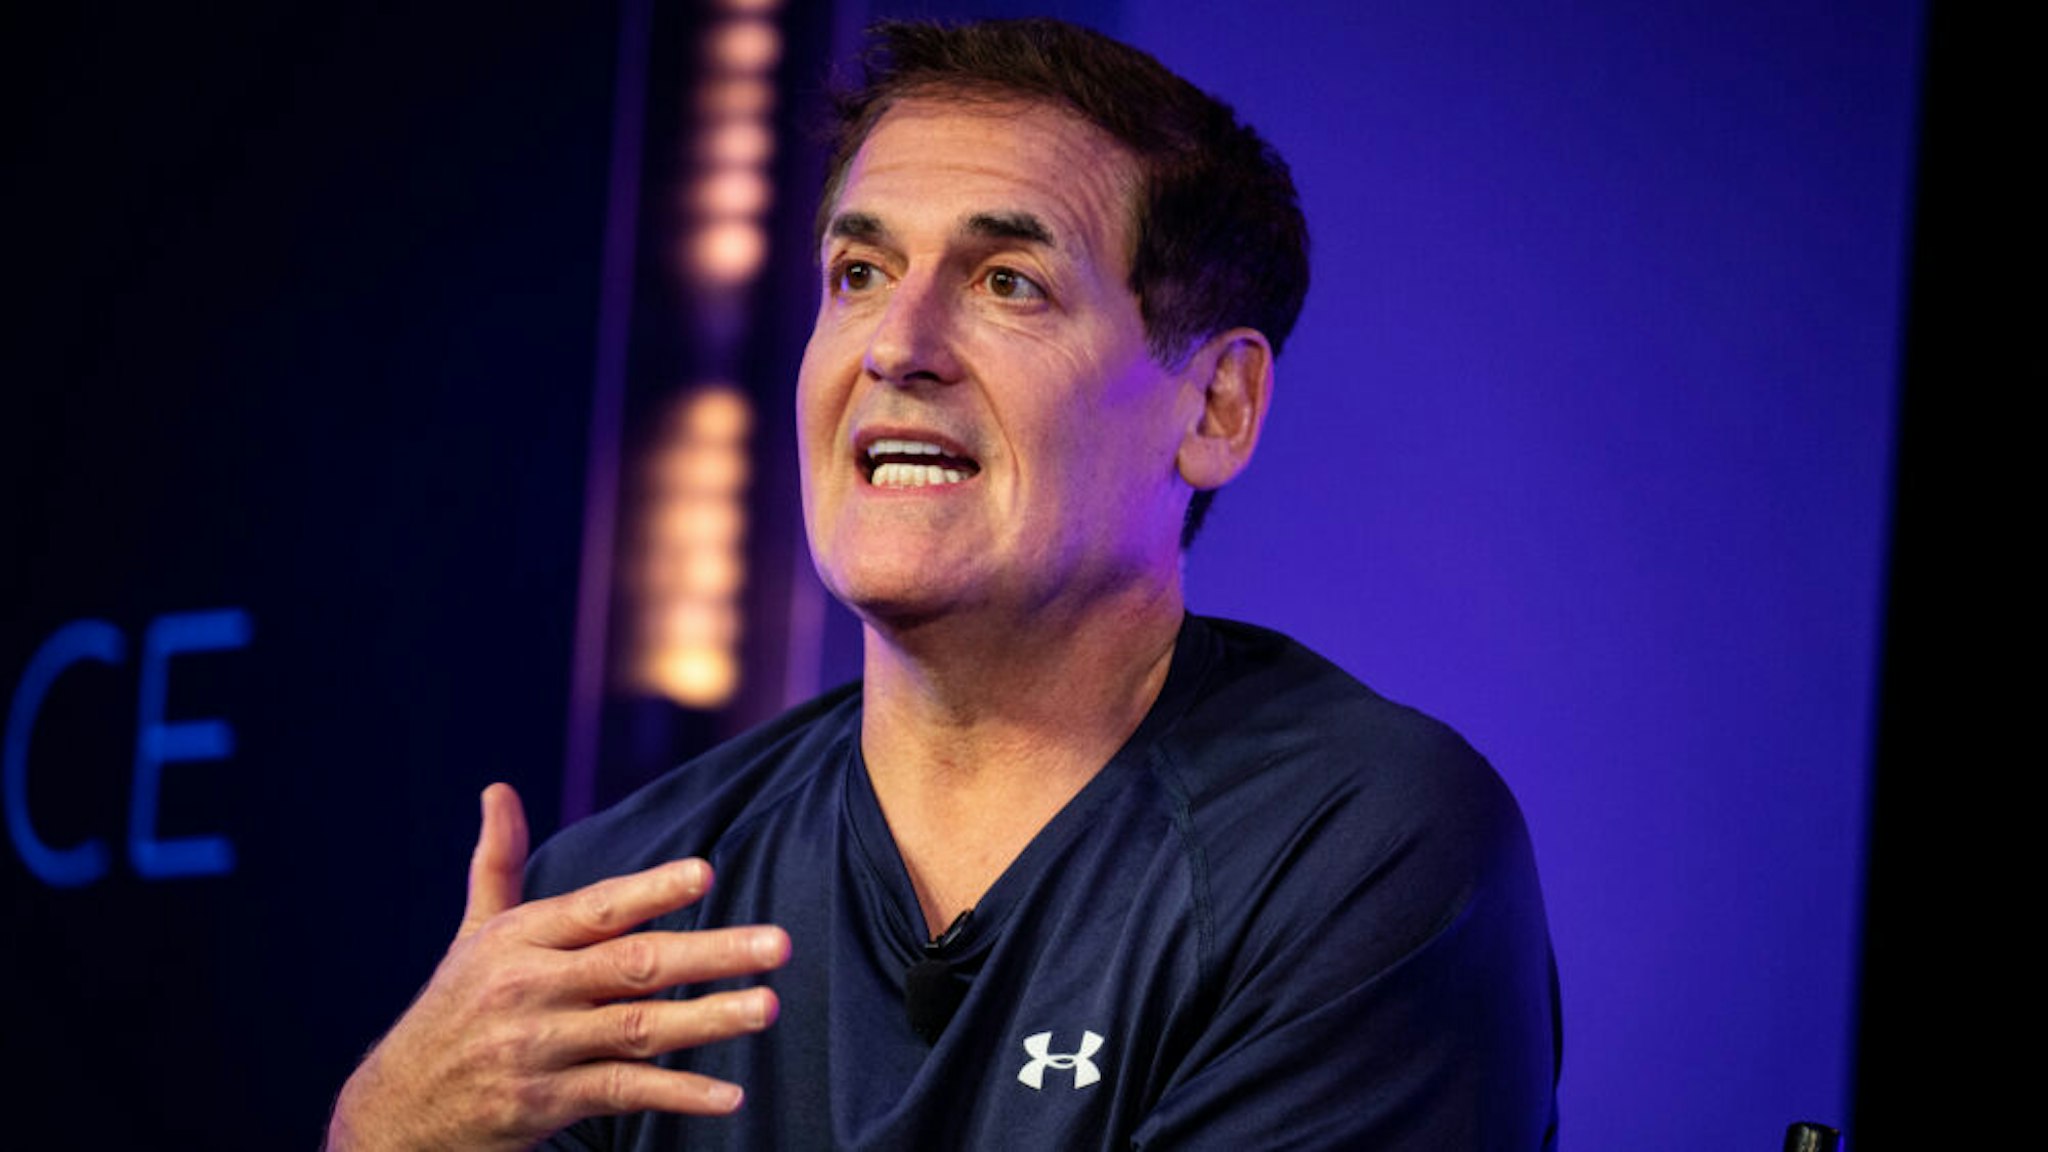 Mark Cuban, chairman and chief executive officer of Axs TV, speaks during the Wall Street Journal Tech Live global technology conference in Laguna Beach, California, U.S., on Monday, Oct. 21, 2019.